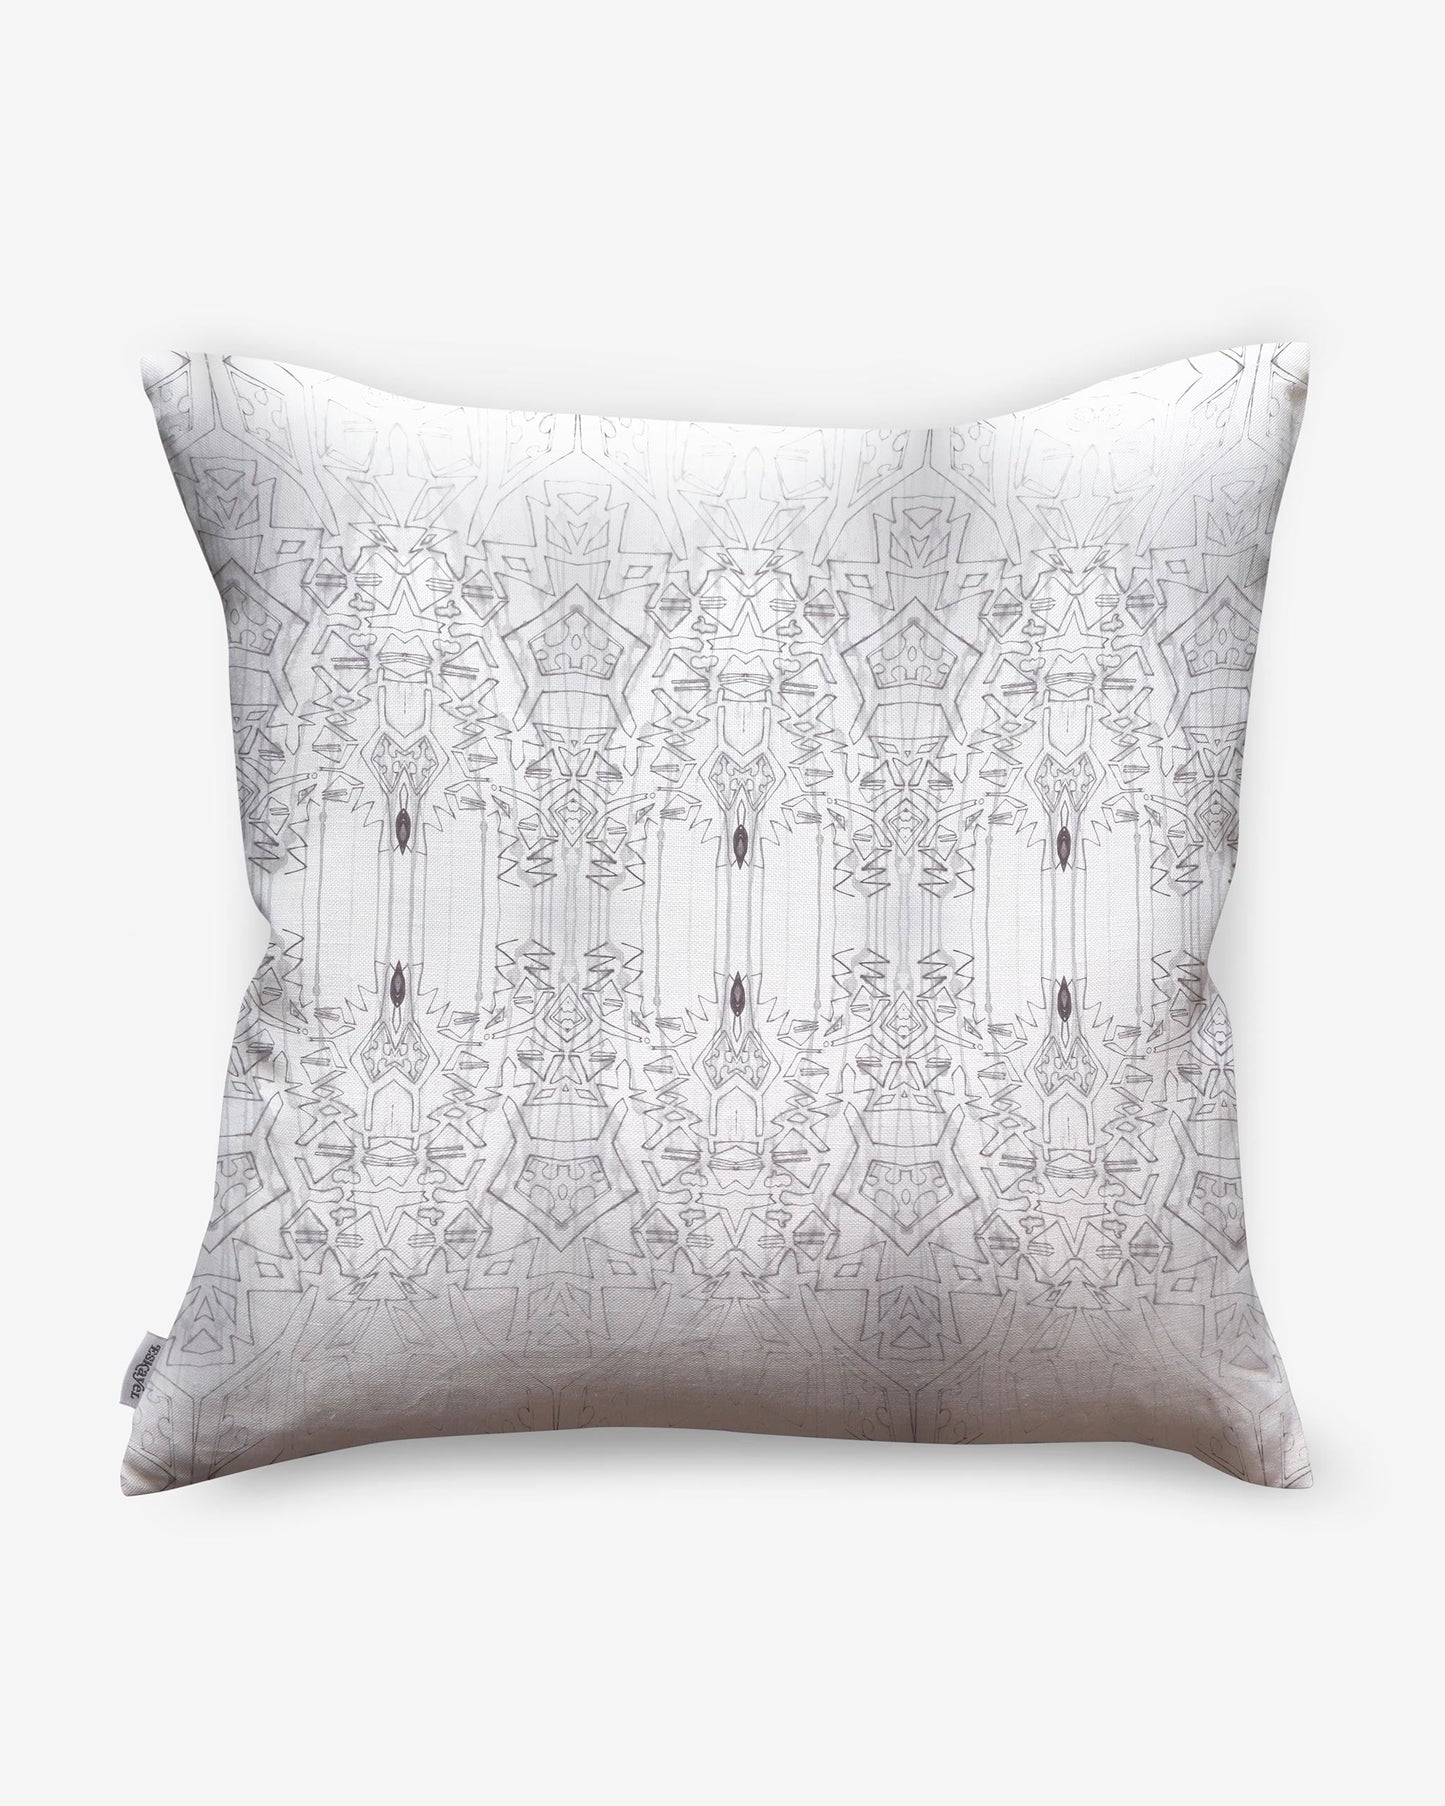 A white pillow with a luxurious fabric and an ornate Akimbo 1 Pillow Greyscale design